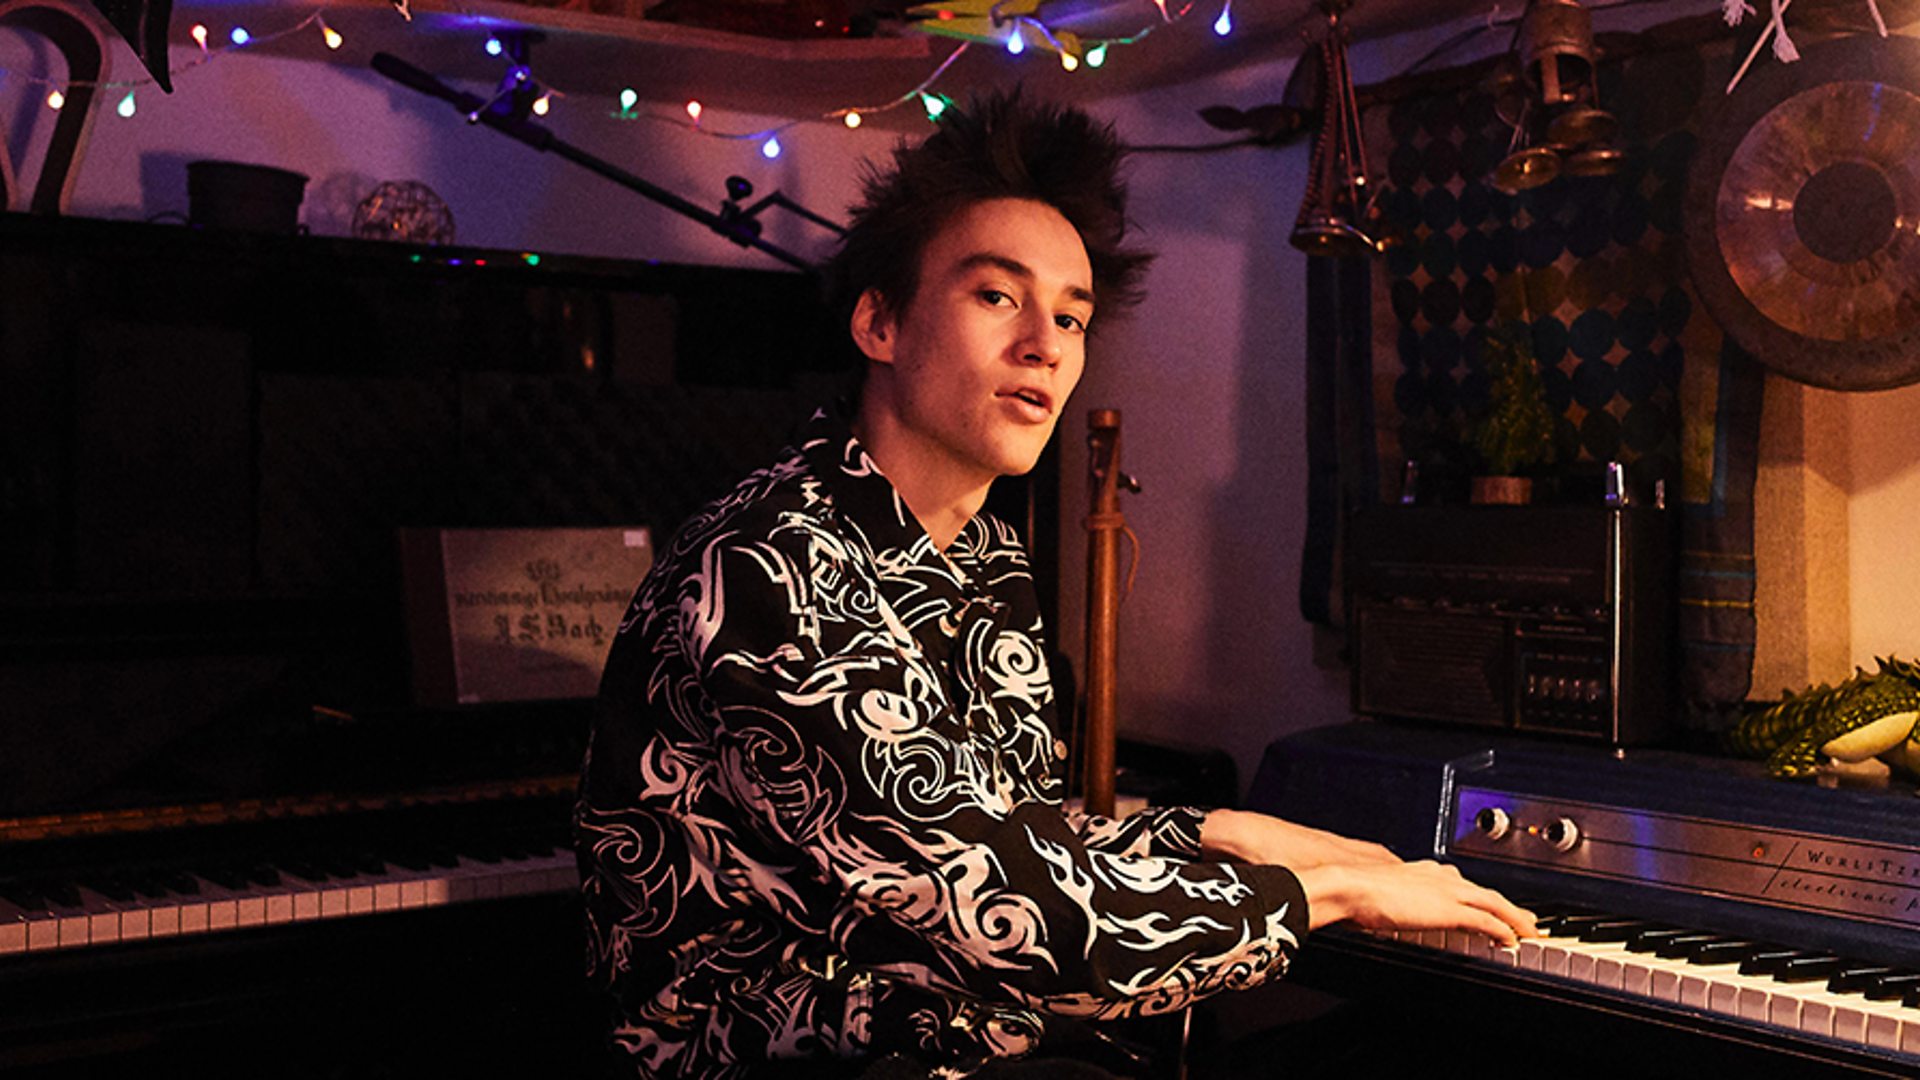 Jacob Collier presents a special selection of music from across the